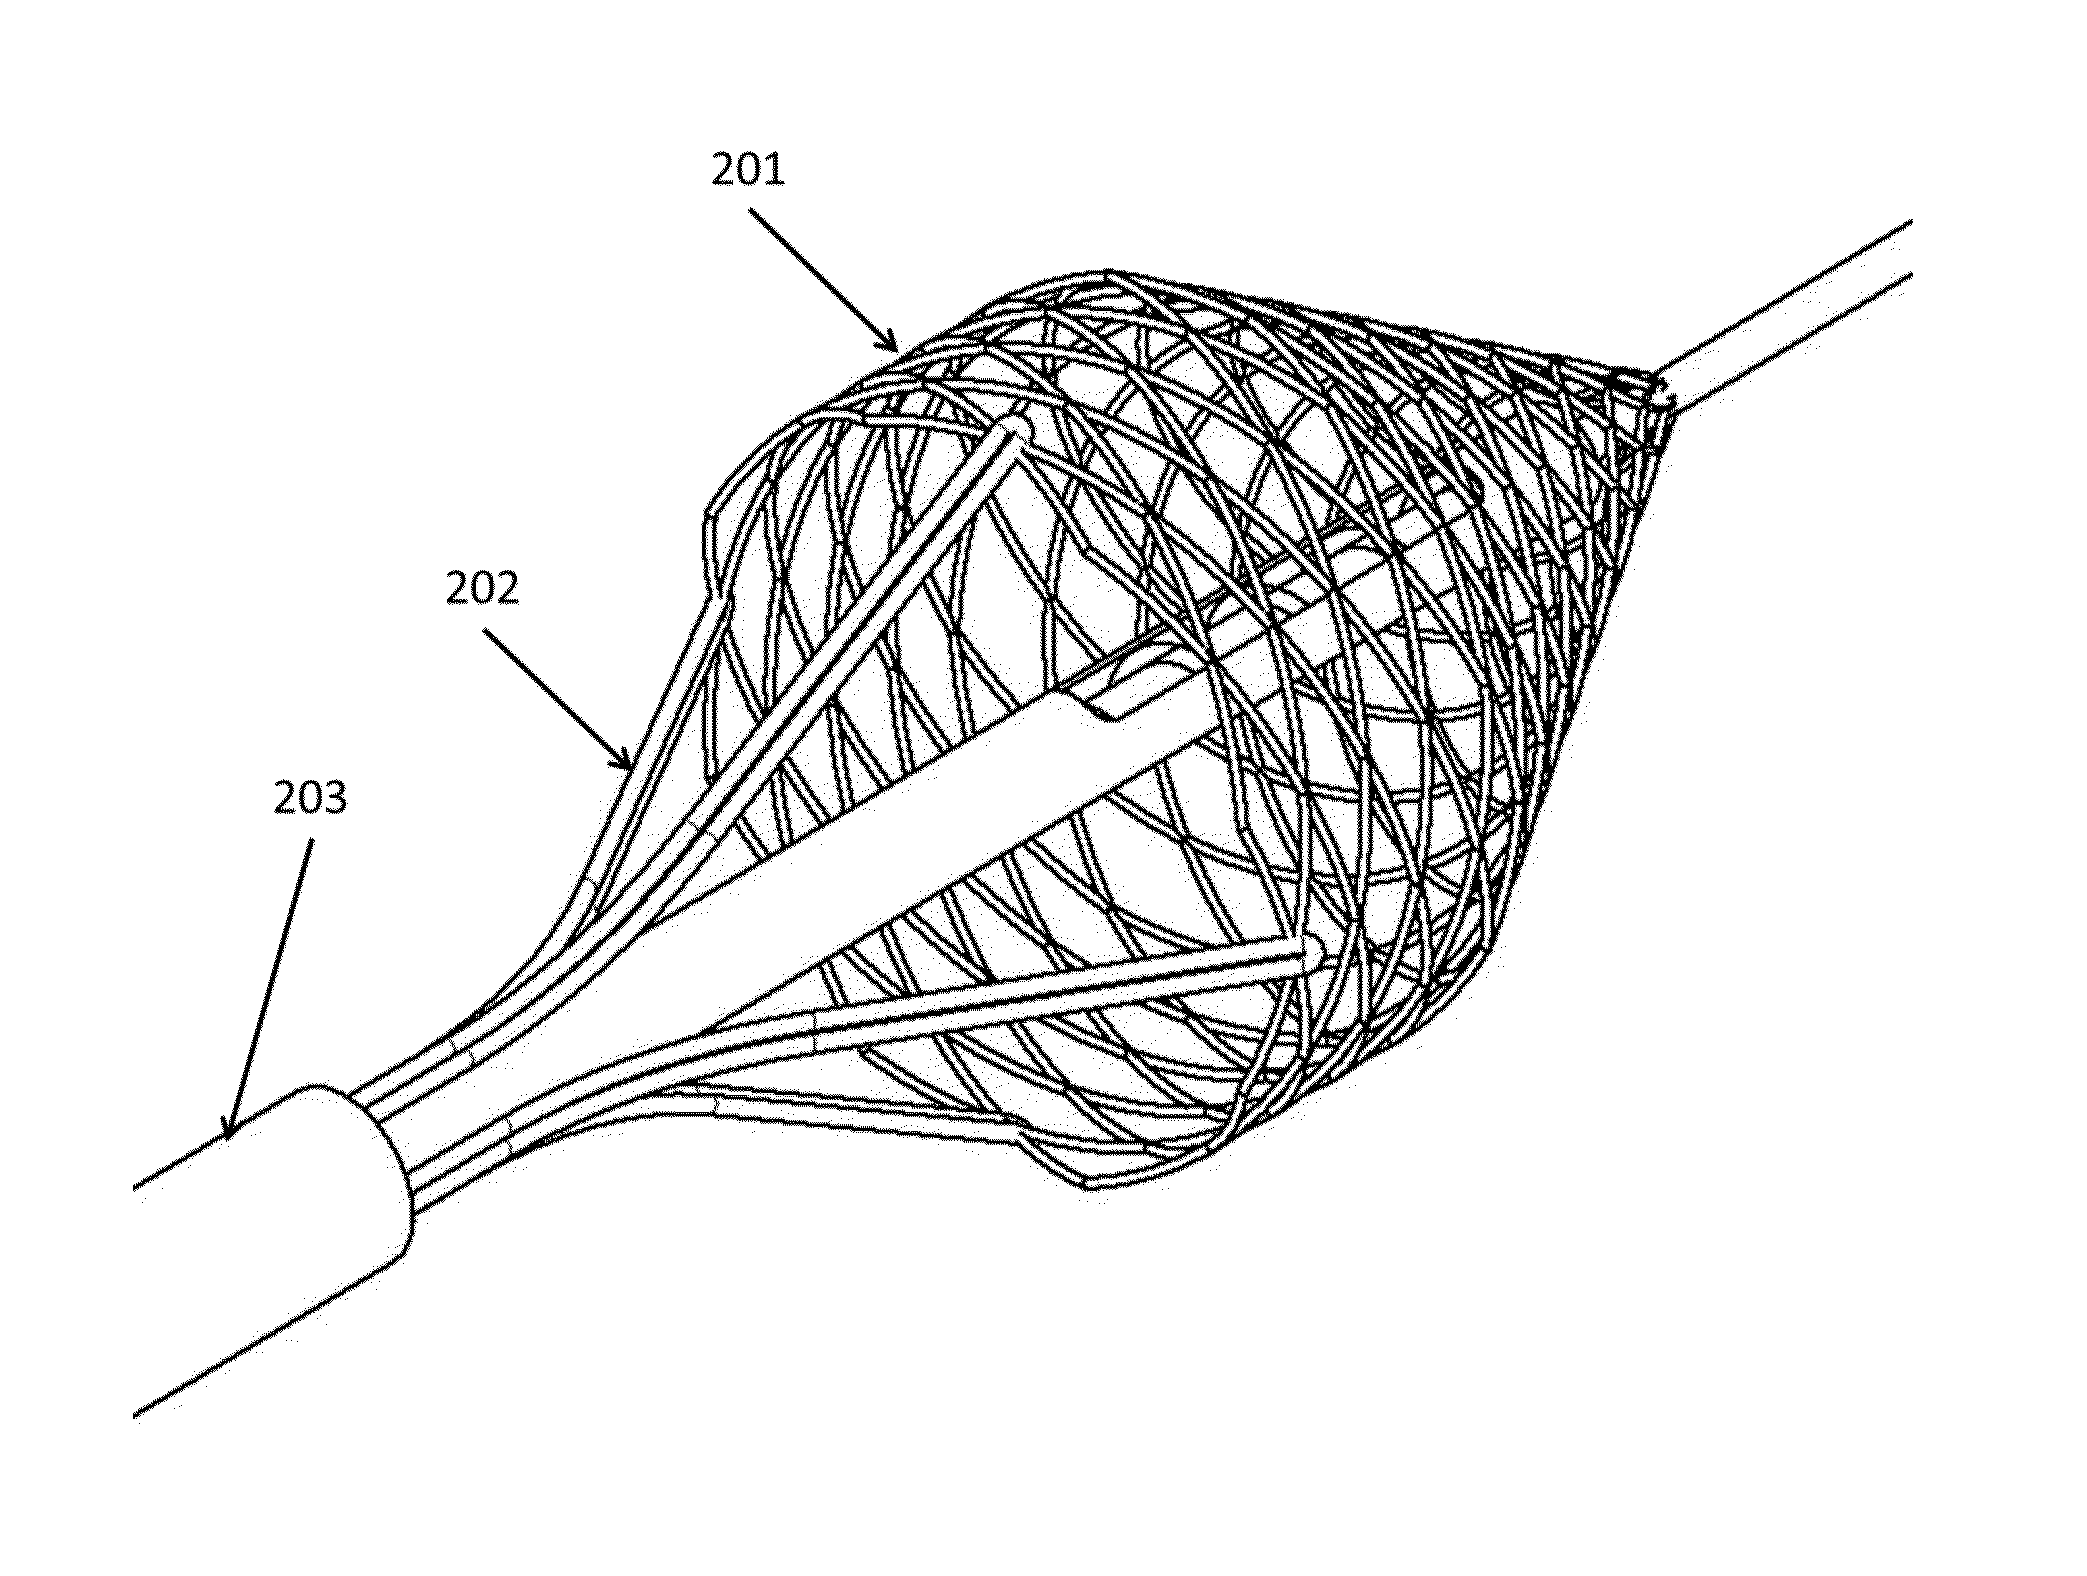 A device suitable for removing matter from inside the lumen and the wall of a body lumen